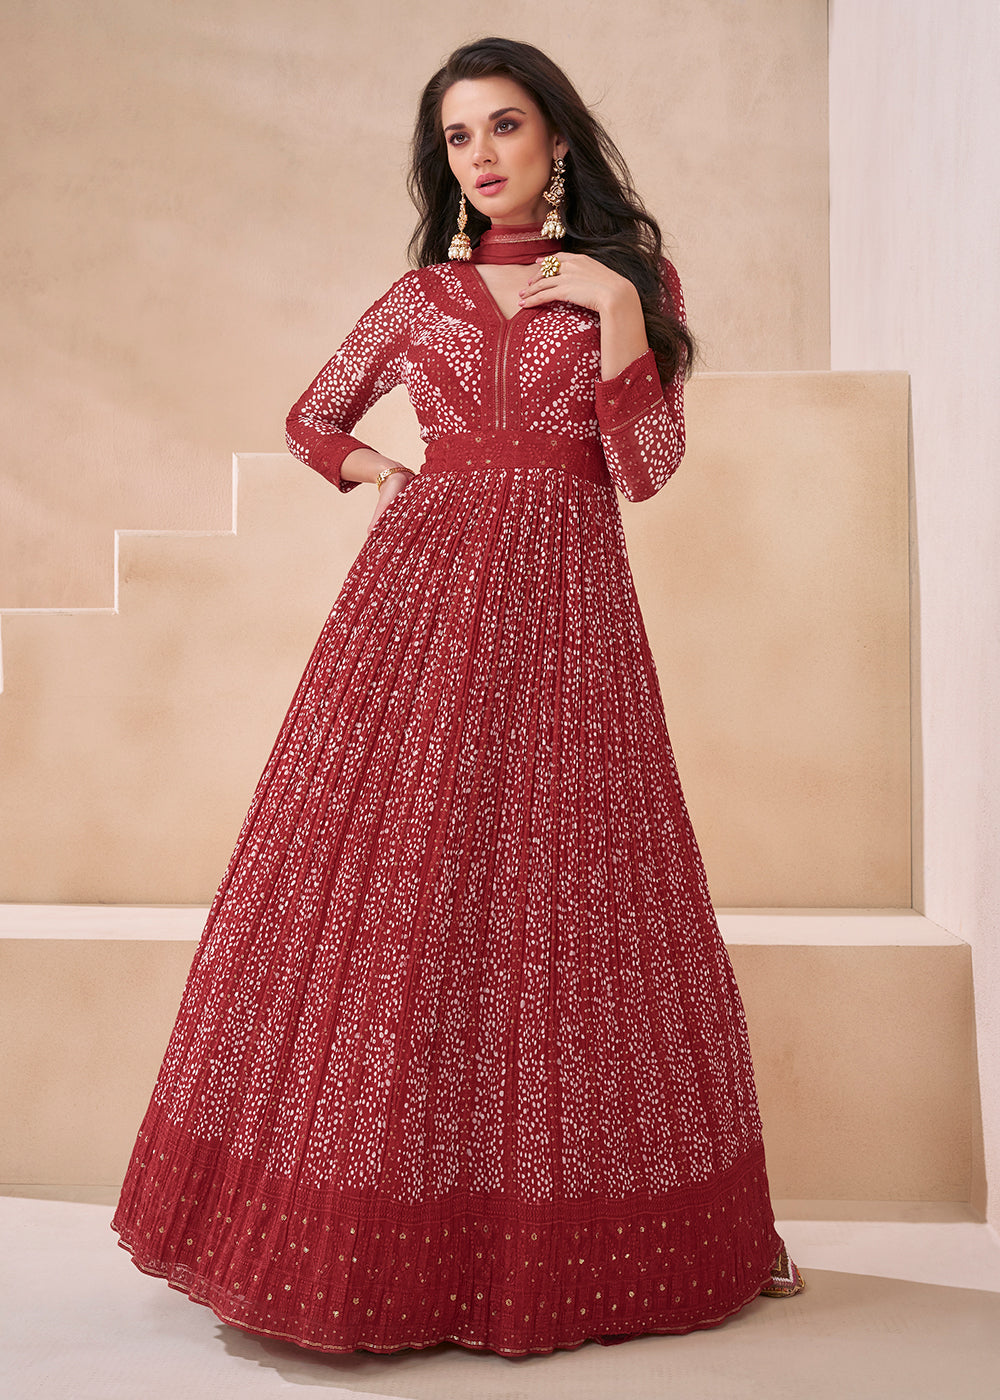 Buy Now Wedding Red Real Georgette Embroidered Anarkali Gown Online in USA, UK, Australia, New Zealand, Canada & Worldwide at Empress Clothing.